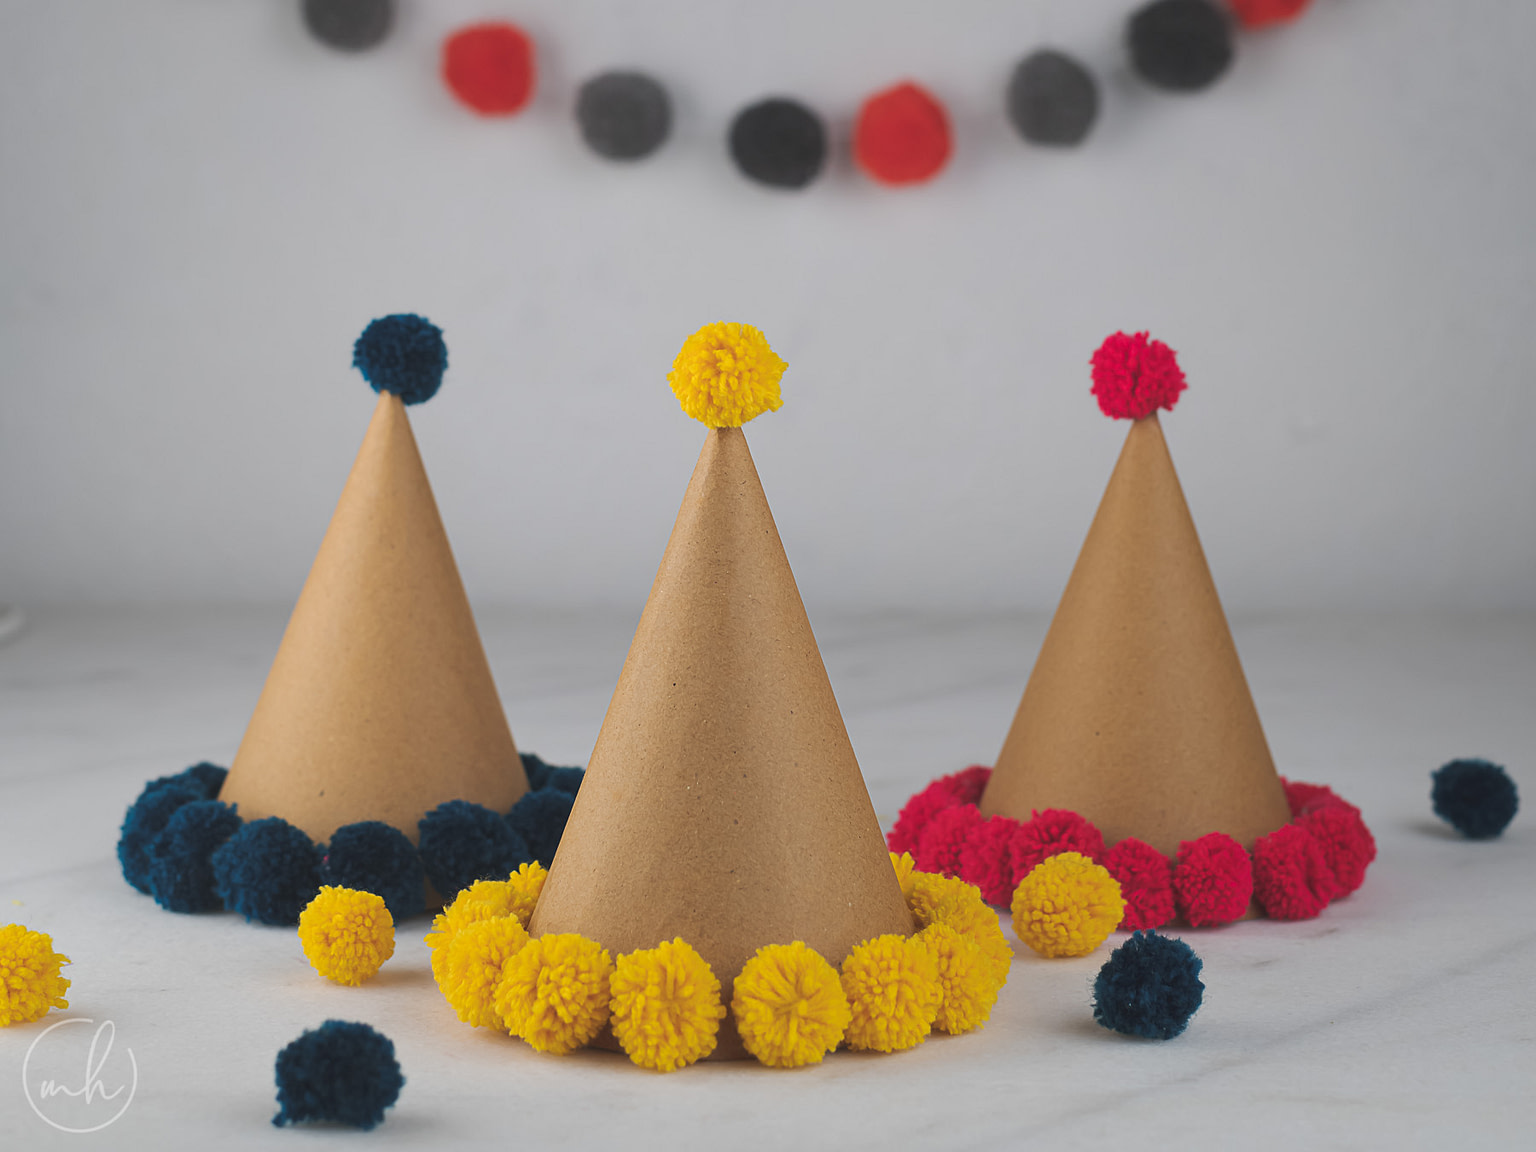 Colourful pompom party hats with red and black party banners in the background and scattered poms